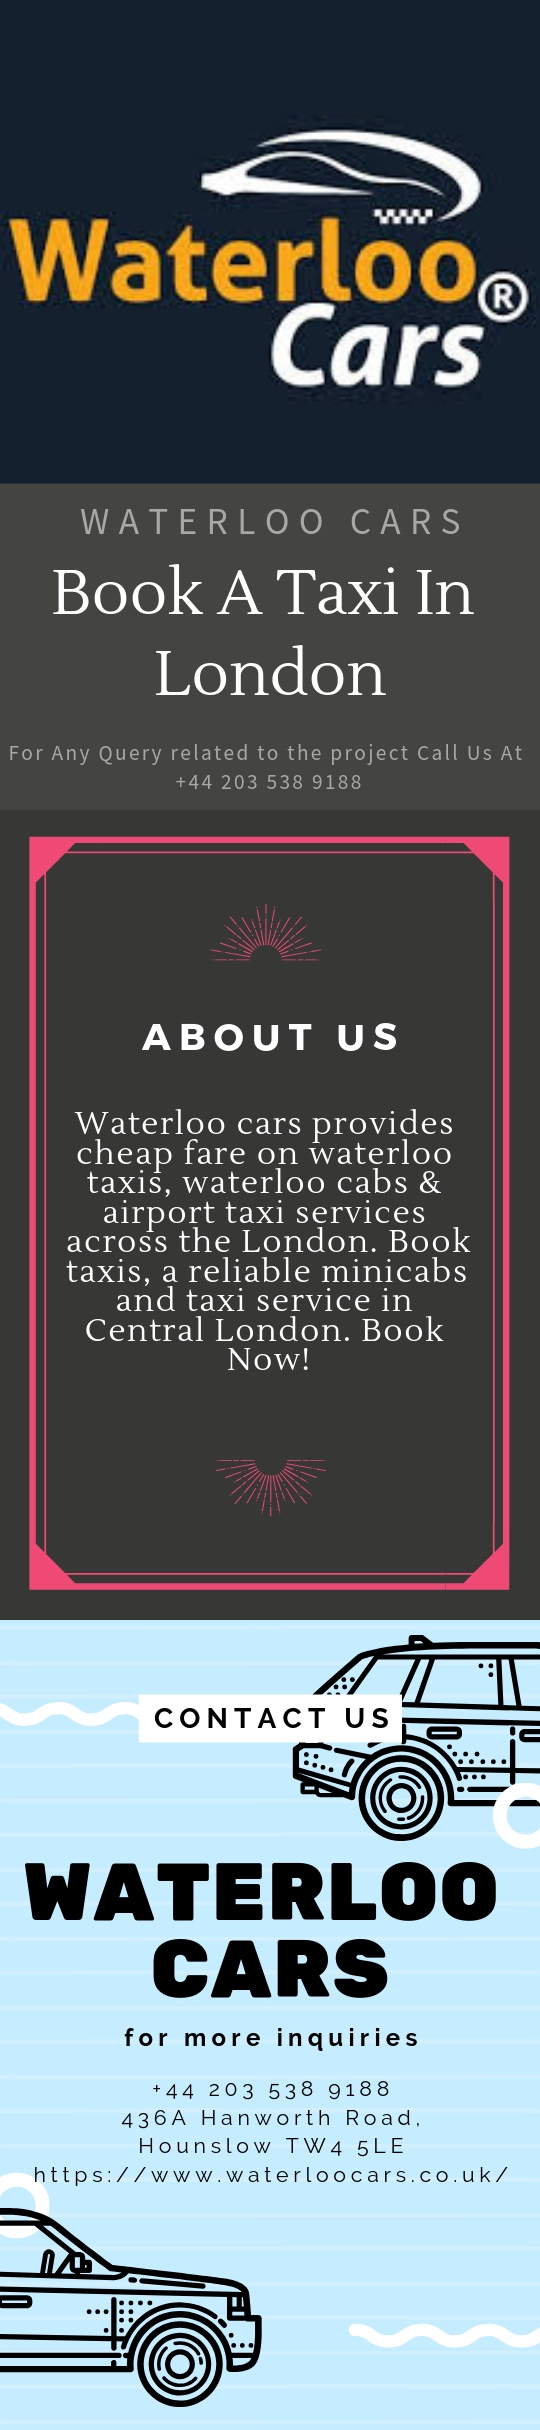 Book A Taxi In London.jpg  by Waterloocars Airport Transfers London